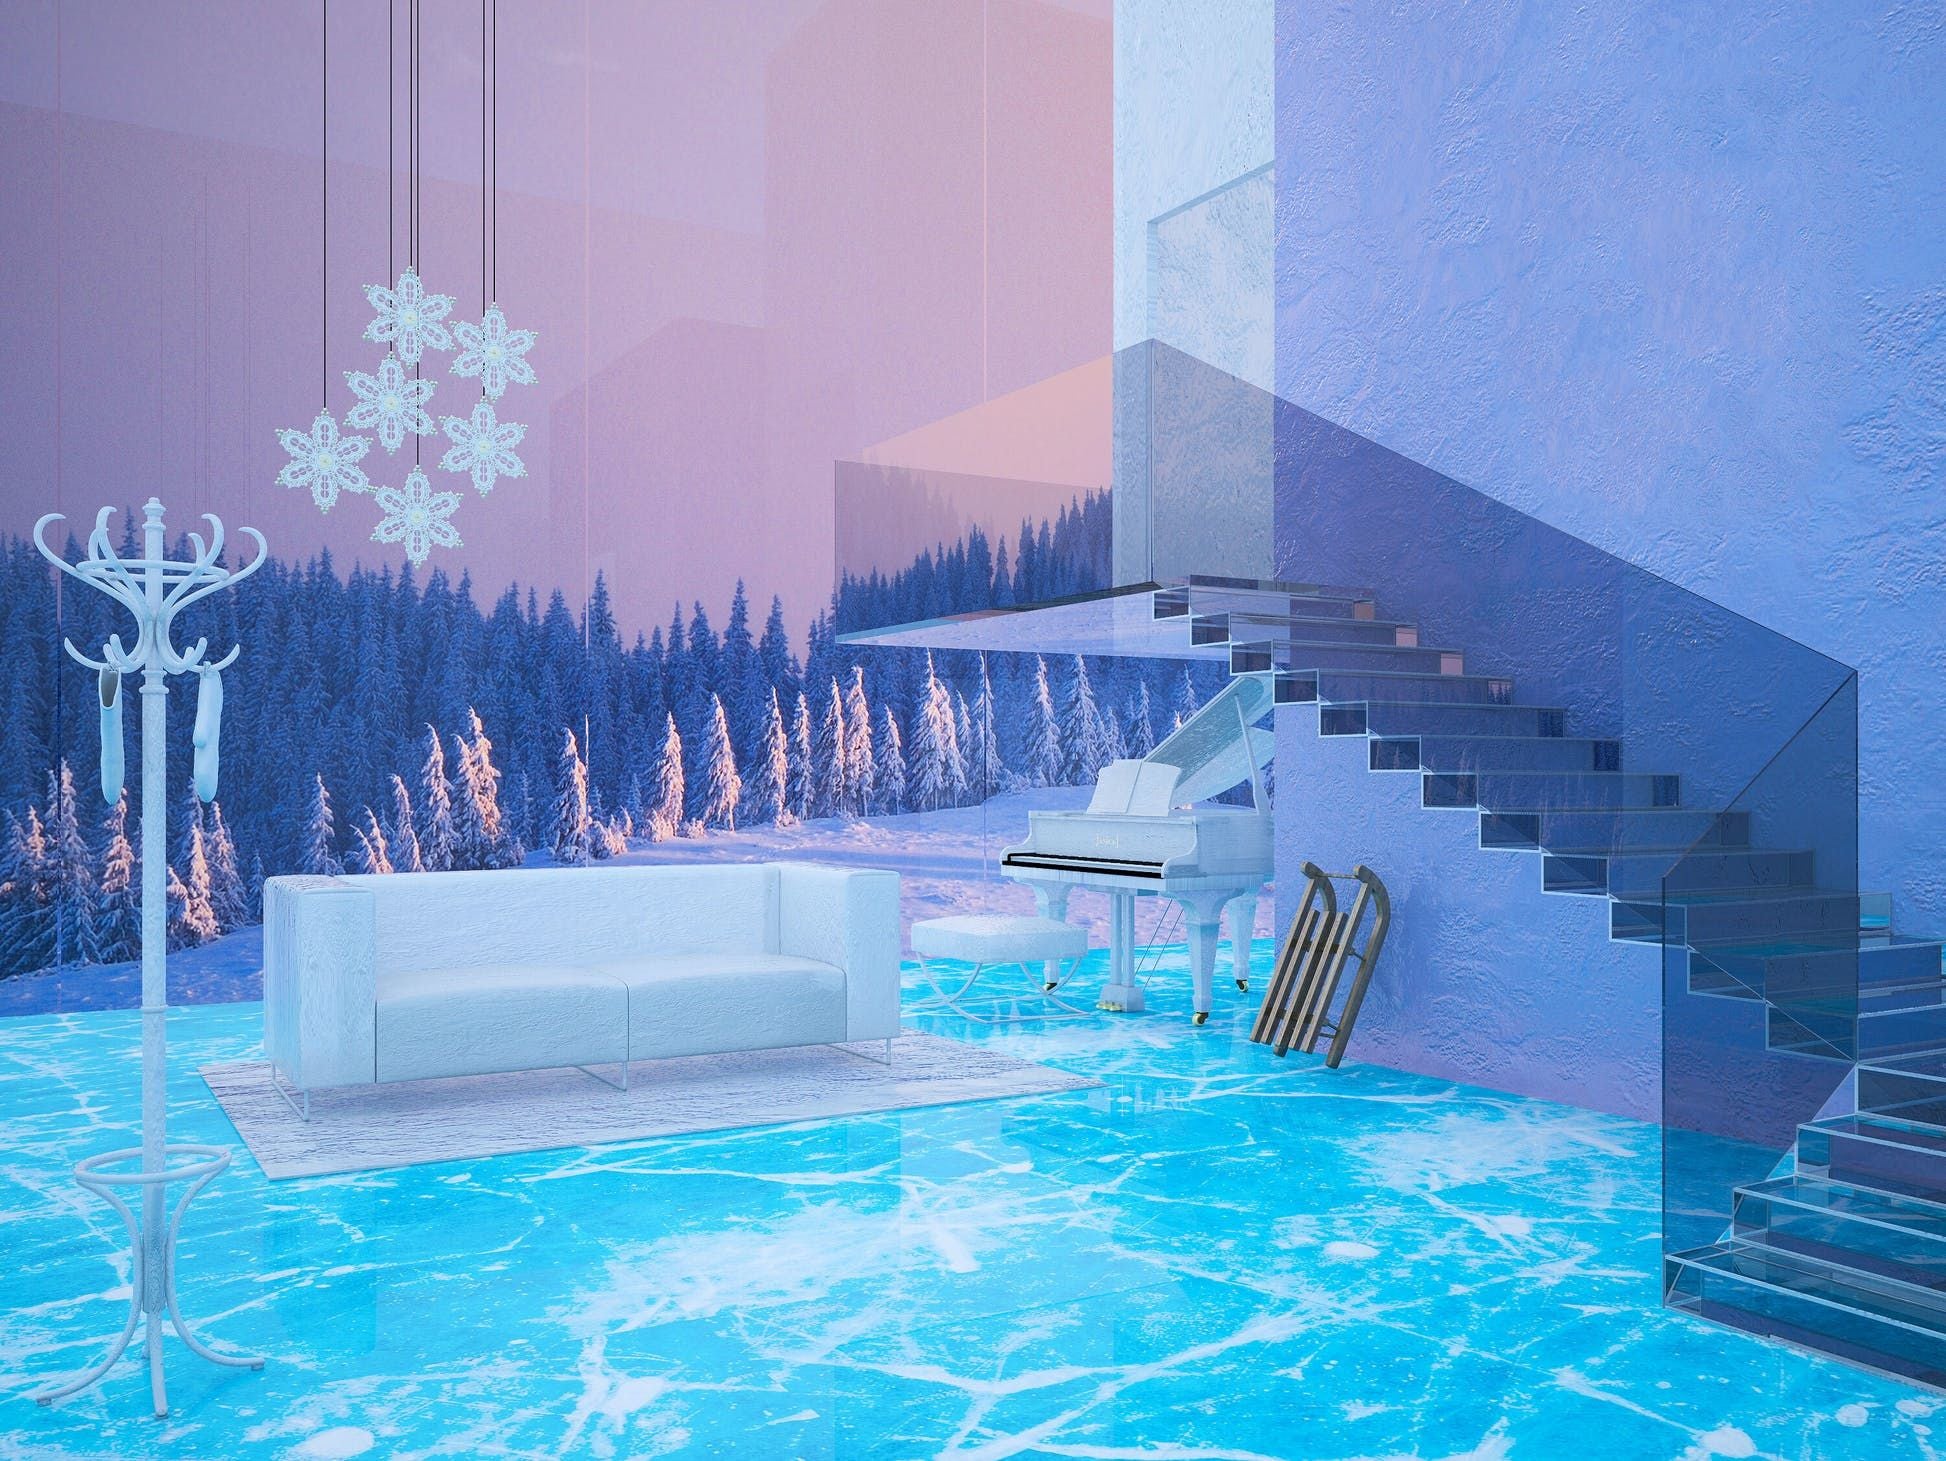 Queen Elsa's fantasy snow pad, as imagined by the minds over at money.co.uk.